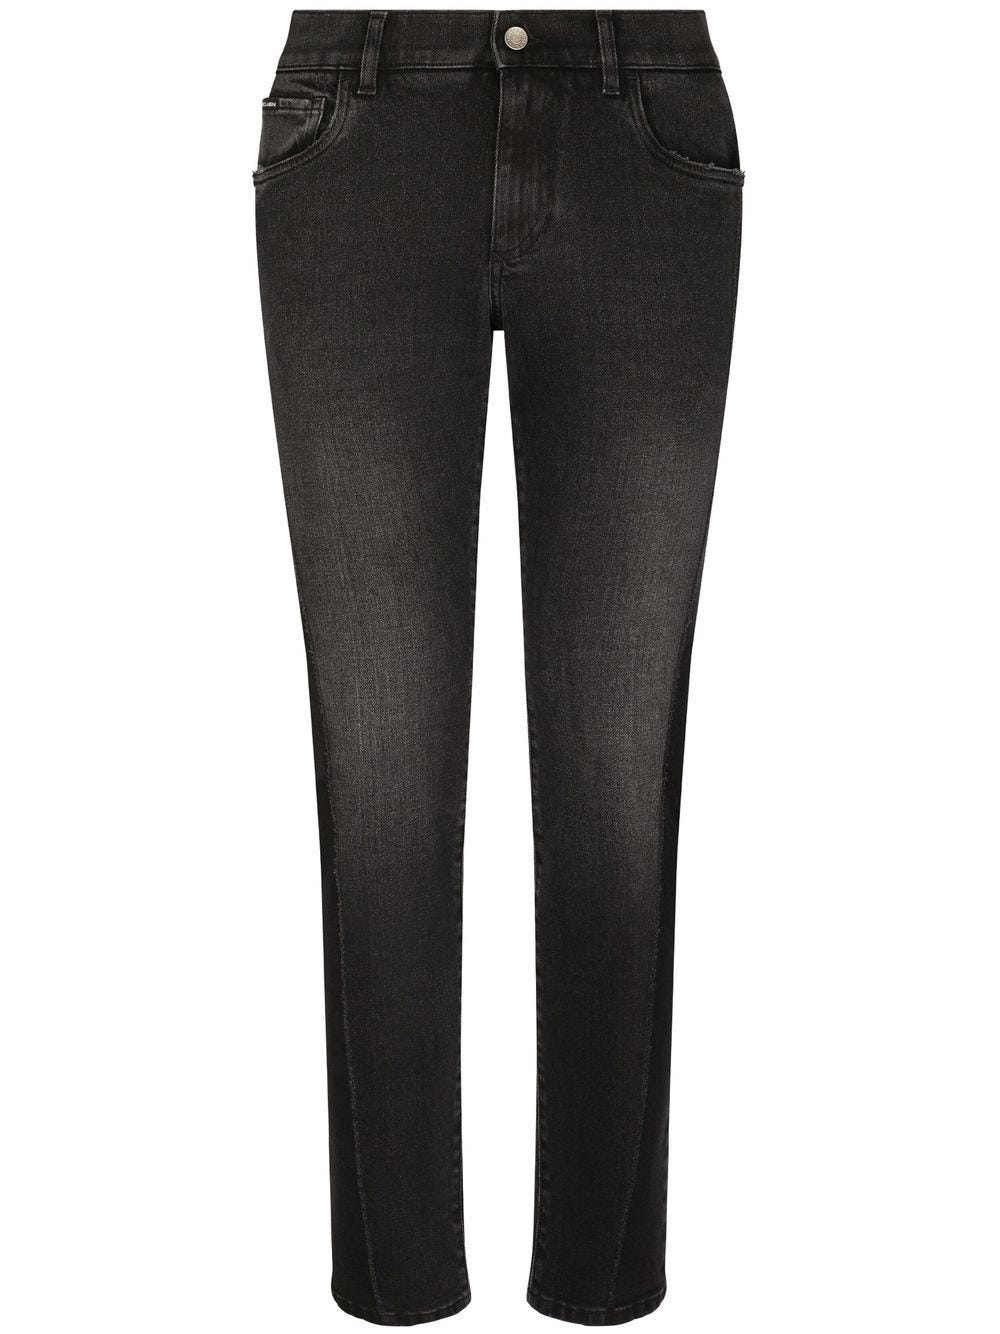 DOLCE & GABBANA BLACK SKINNY JEANS WITH LOGO PLAQUE ON THE BACK